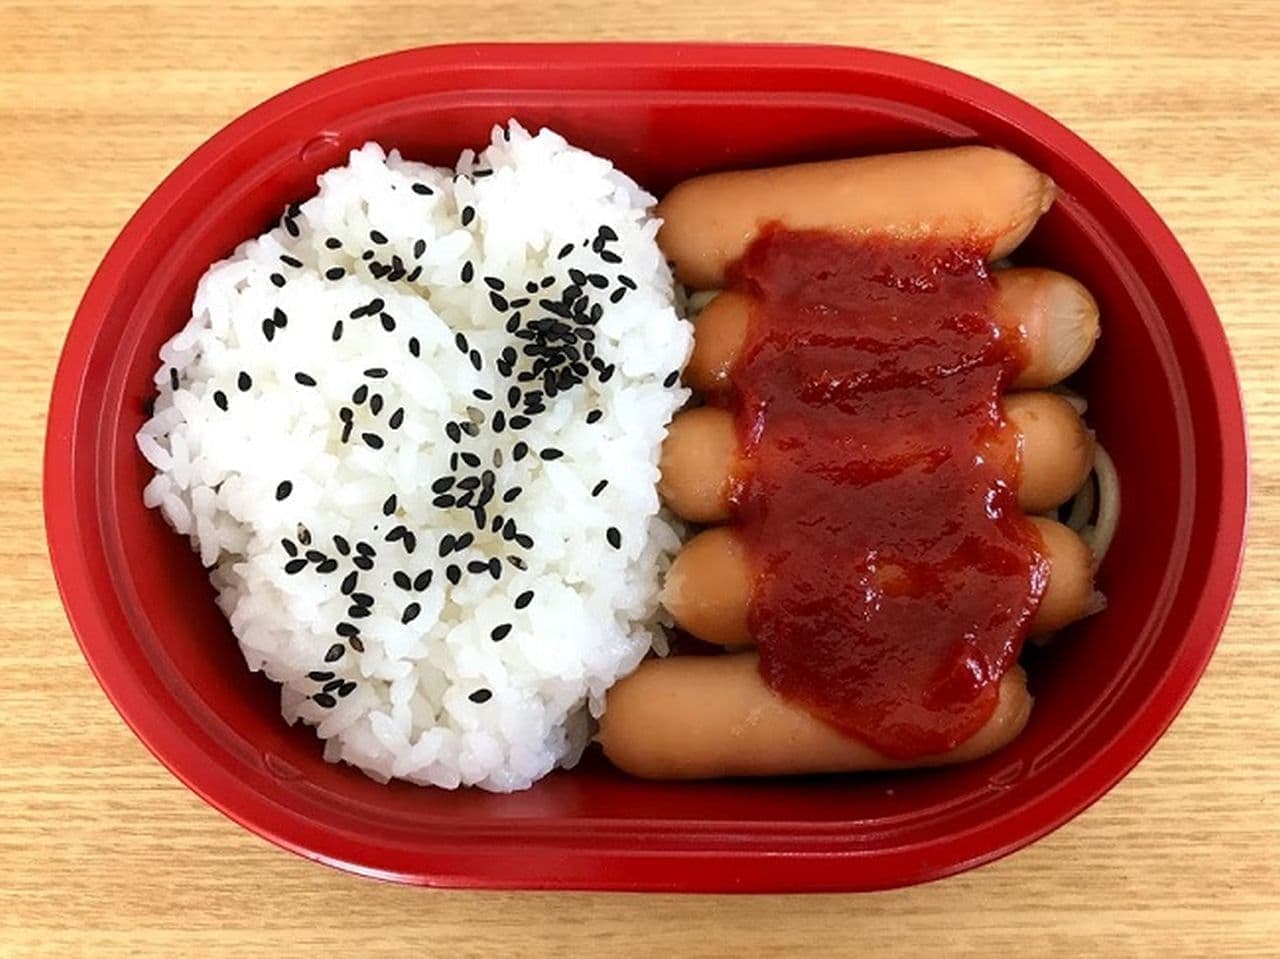 The first "sausage bento" in the "Only Bento" series